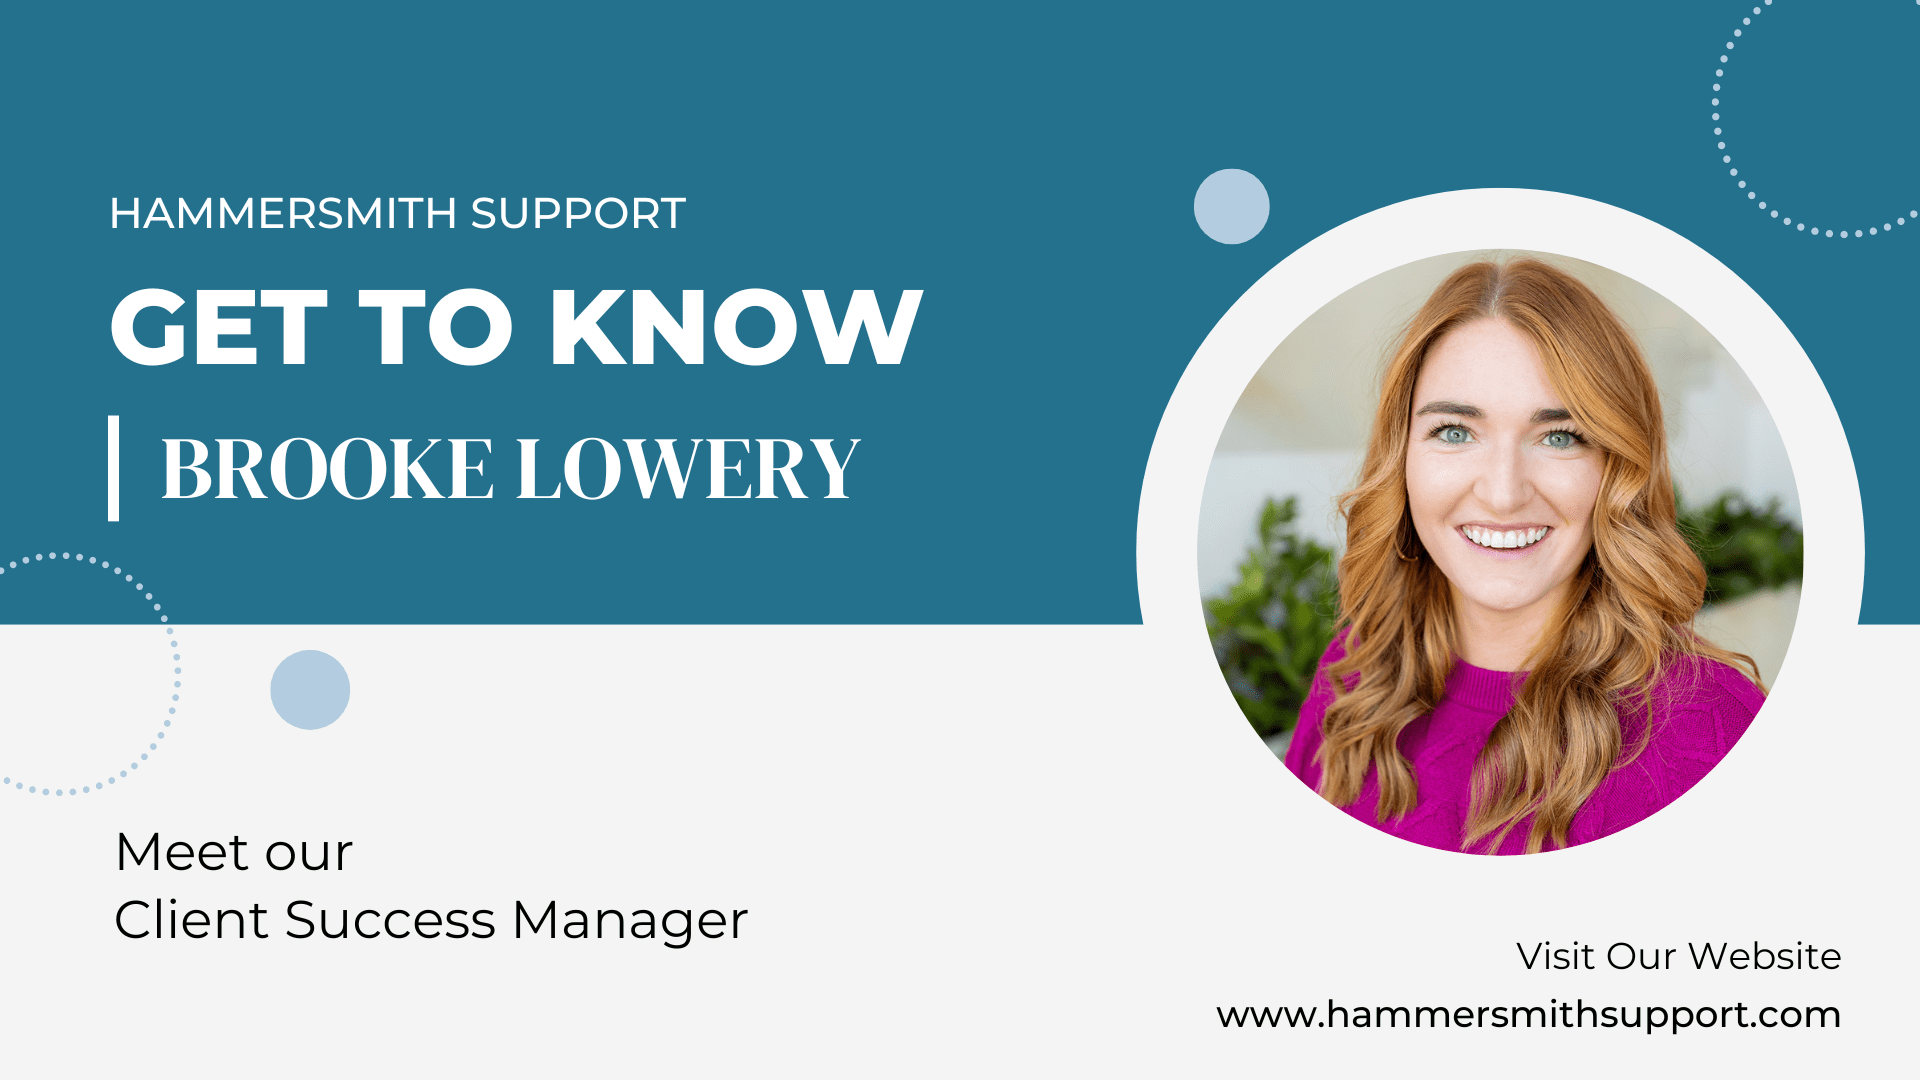 Get to know Brooke, Lowery, Nashville Client Success Manager